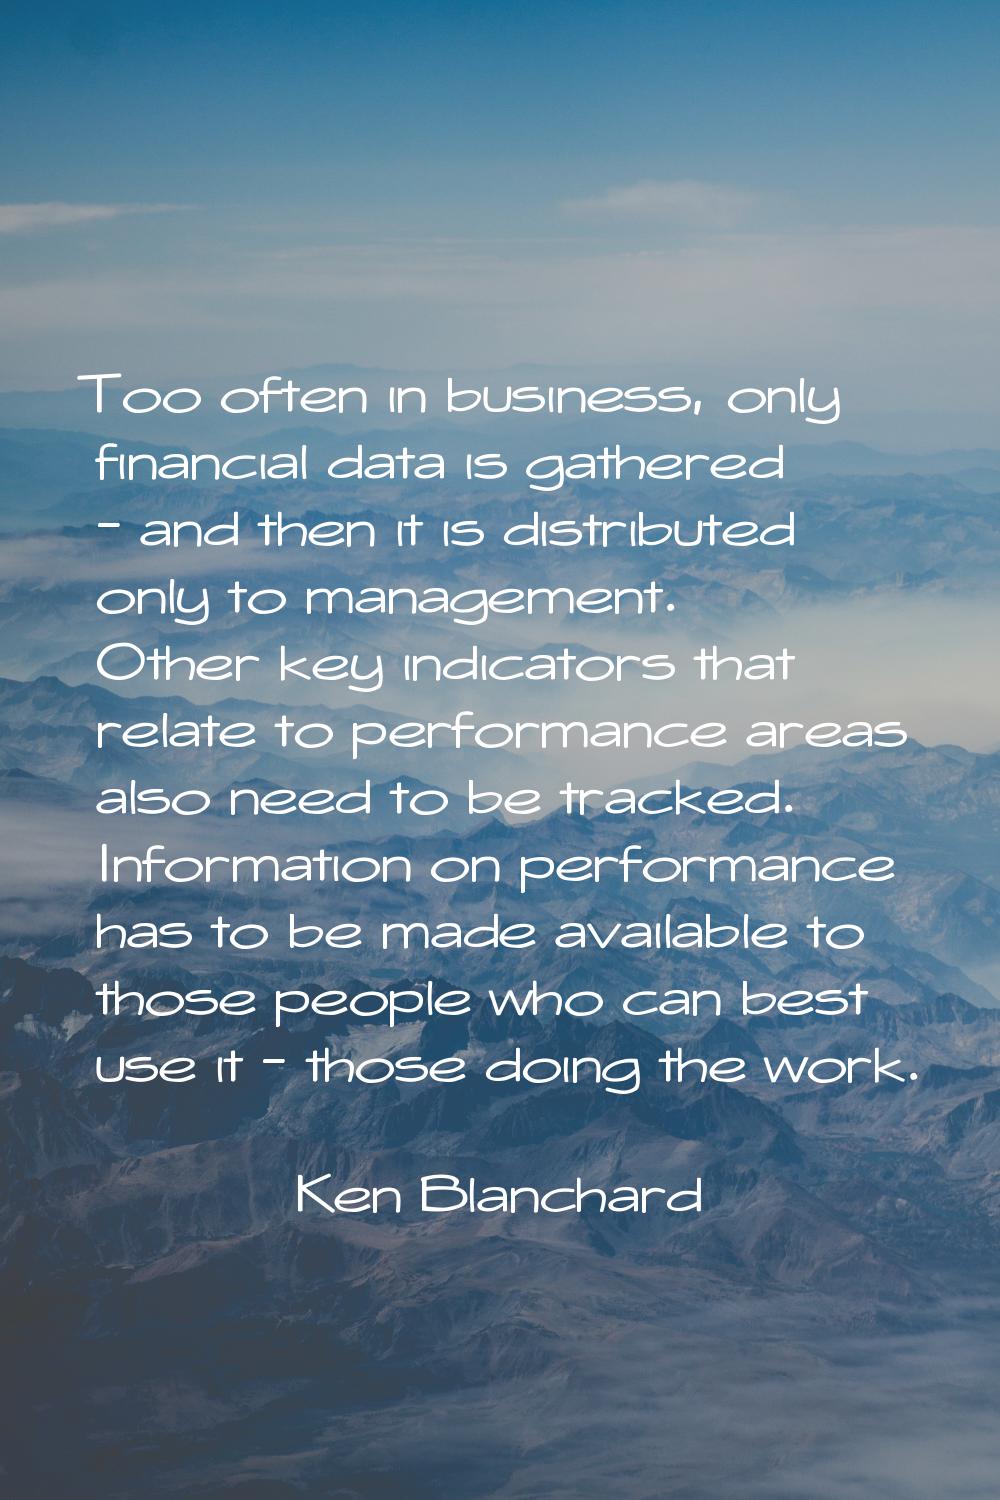 Too often in business, only financial data is gathered - and then it is distributed only to managem